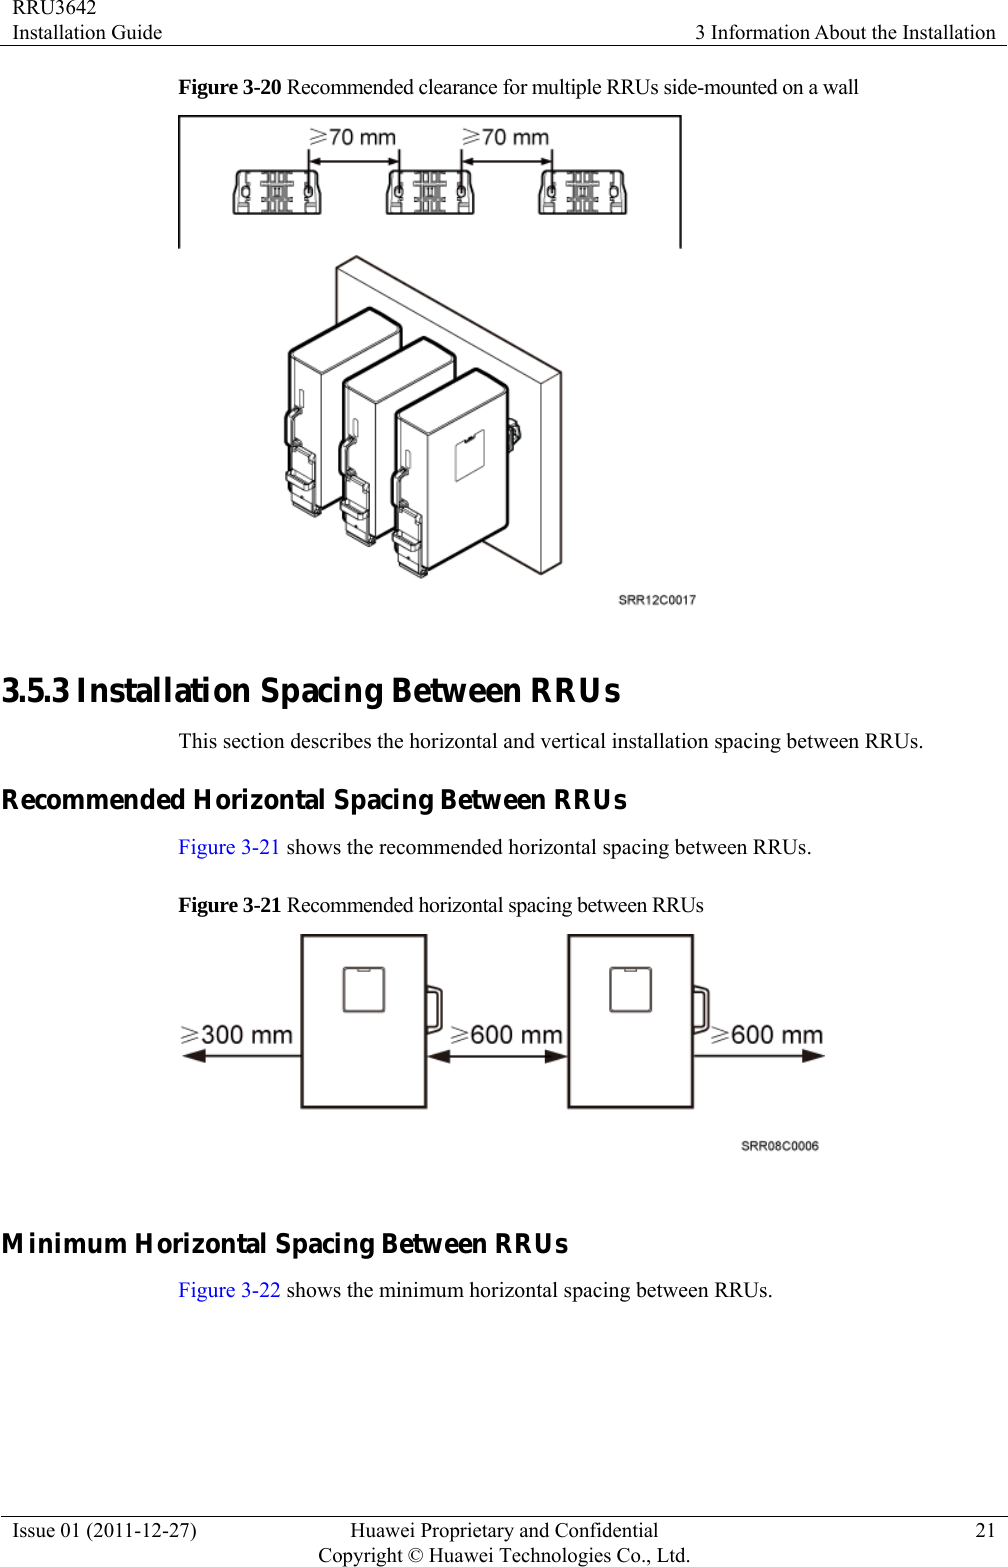 RRU3642 Installation Guide  3 Information About the Installation Issue 01 (2011-12-27)  Huawei Proprietary and Confidential         Copyright © Huawei Technologies Co., Ltd.21 Figure 3-20 Recommended clearance for multiple RRUs side-mounted on a wall   3.5.3 Installation Spacing Between RRUs This section describes the horizontal and vertical installation spacing between RRUs. Recommended Horizontal Spacing Between RRUs Figure 3-21 shows the recommended horizontal spacing between RRUs. Figure 3-21 Recommended horizontal spacing between RRUs   Minimum Horizontal Spacing Between RRUs Figure 3-22 shows the minimum horizontal spacing between RRUs.   